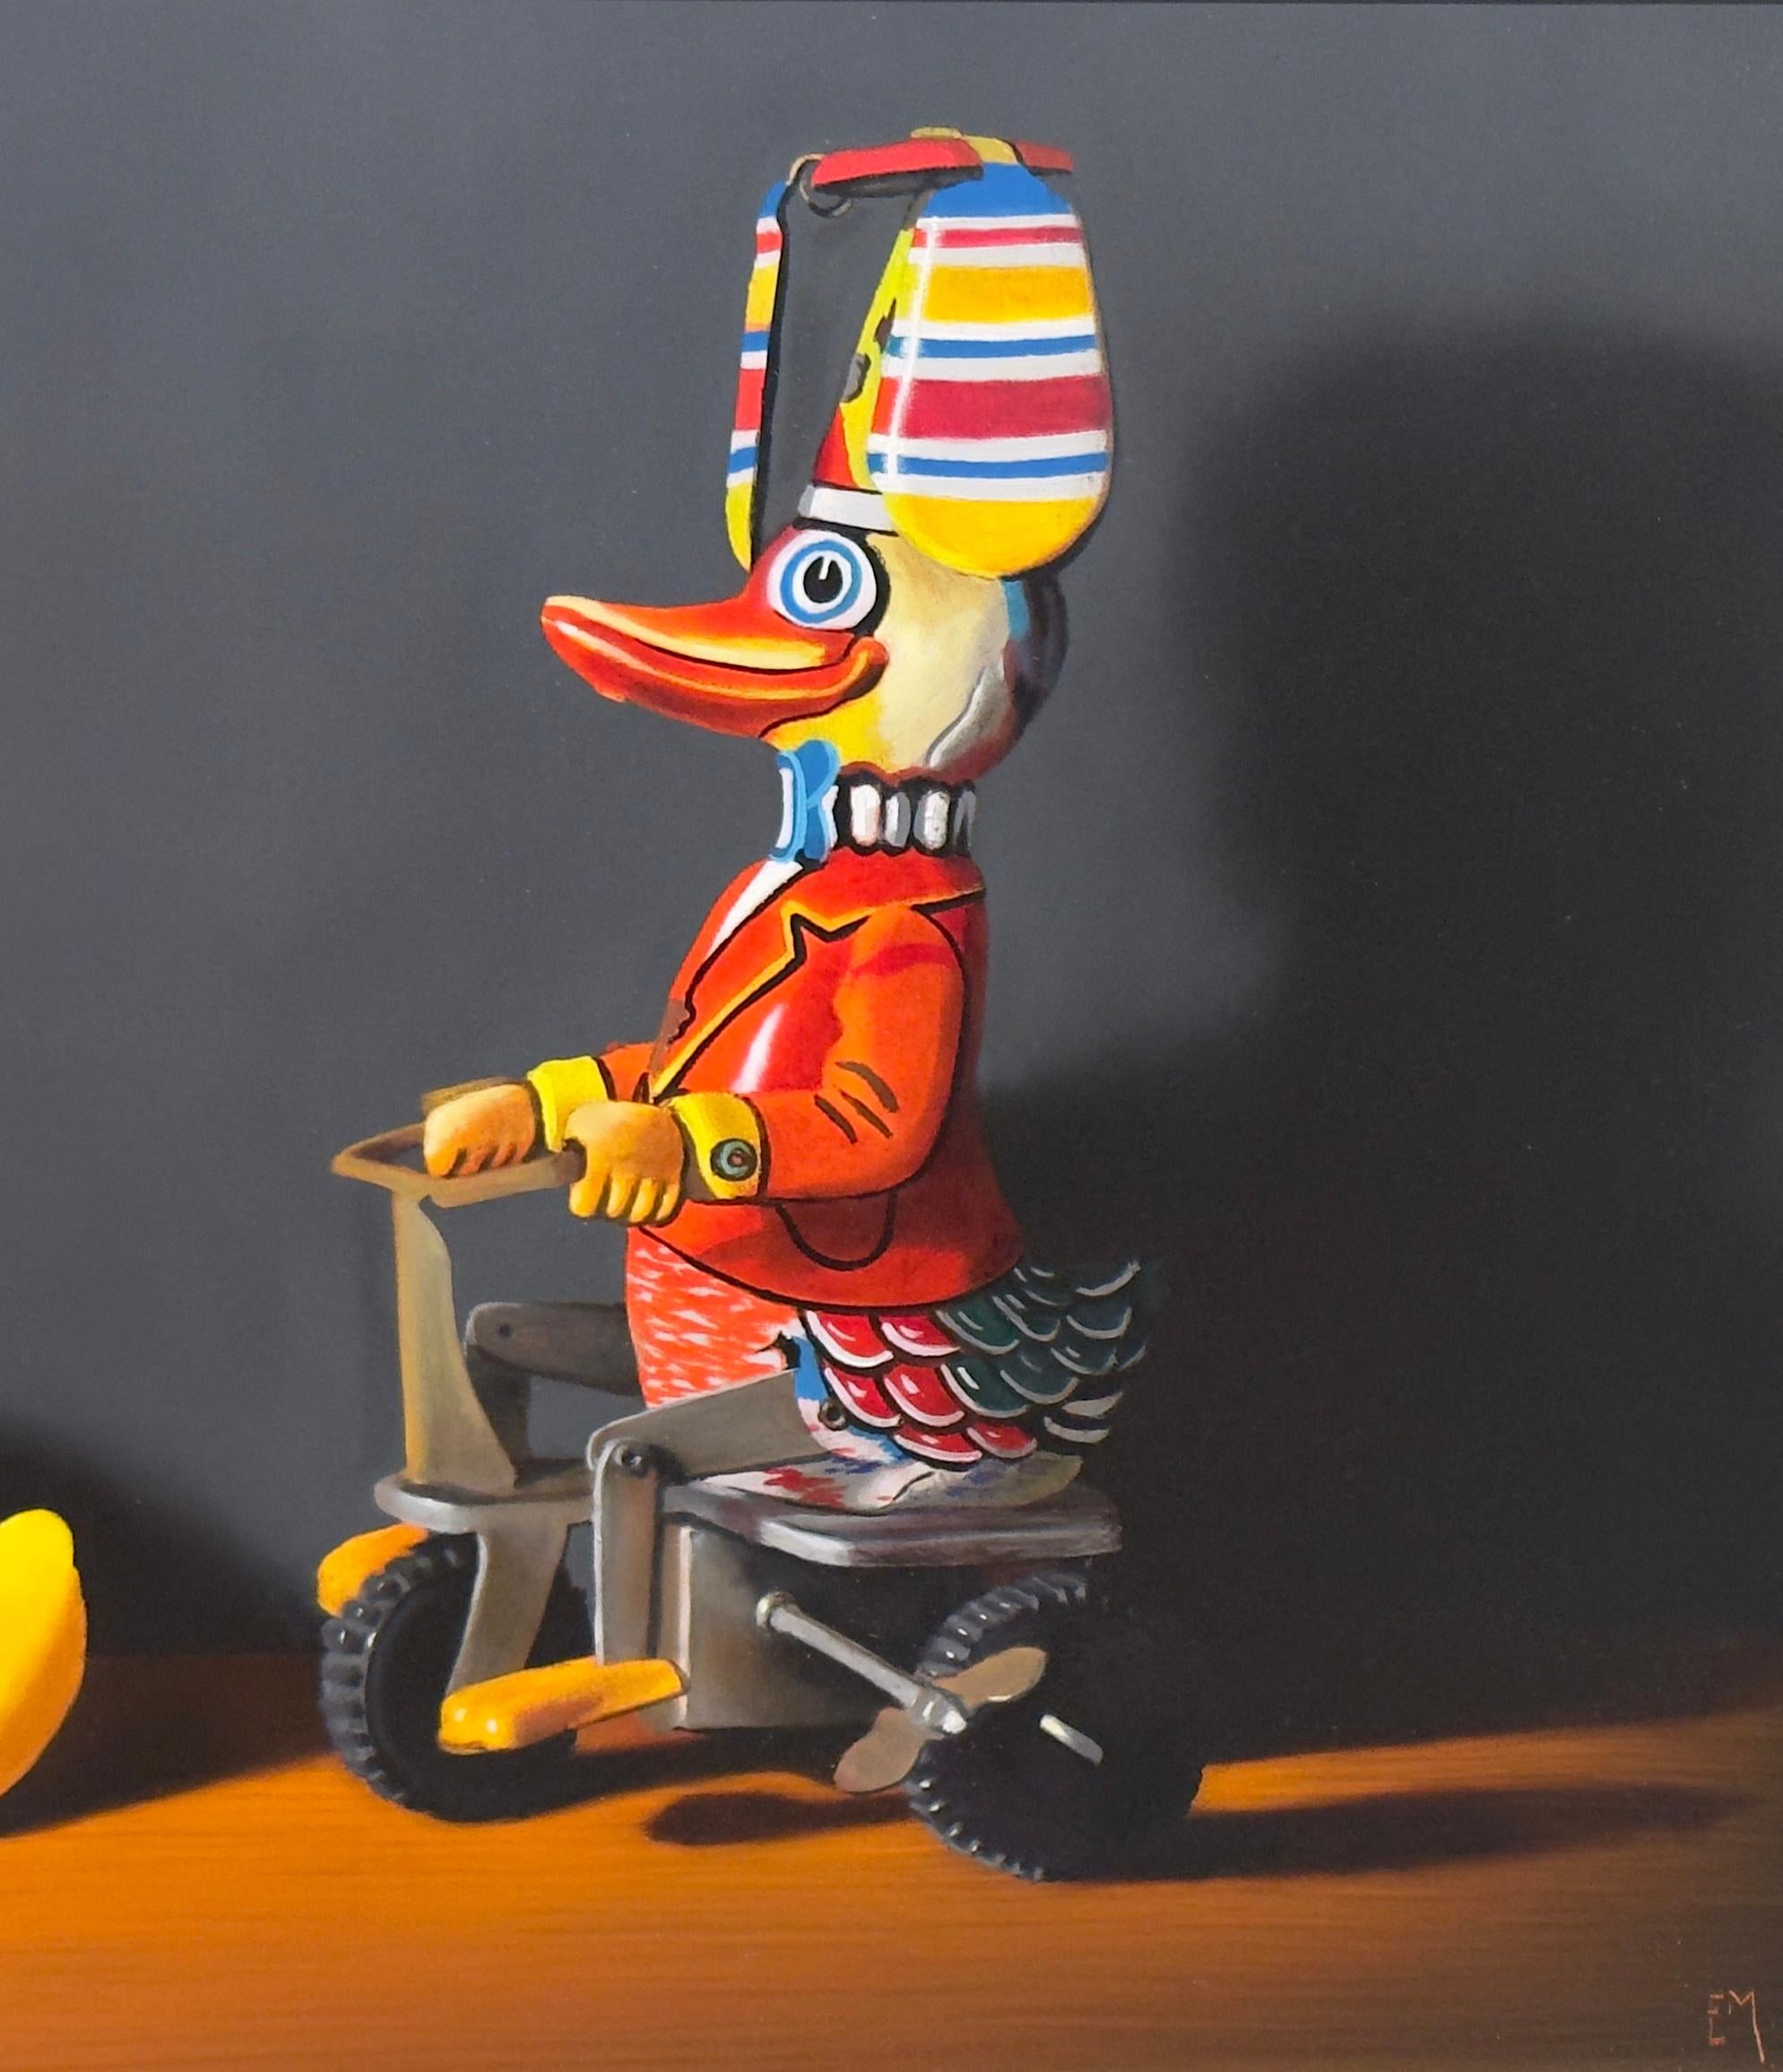 KEEP YOUR DUCKS IN A ROW - Contemporary/ Humorous/ Still Life - Painting by Elizabeth McGhee